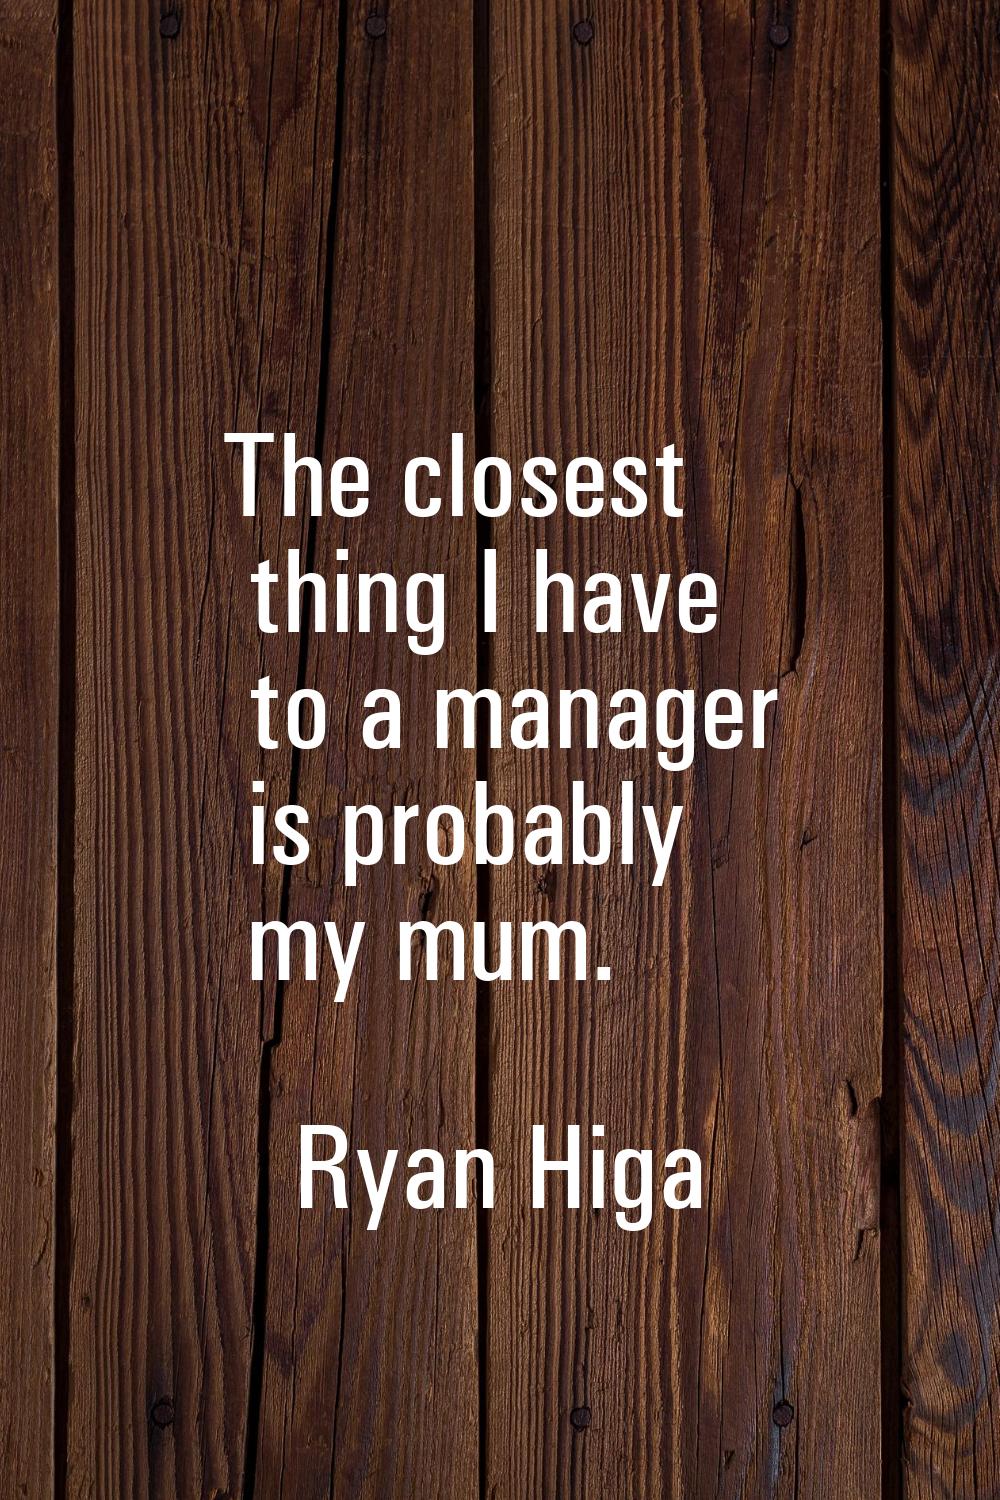 The closest thing I have to a manager is probably my mum.